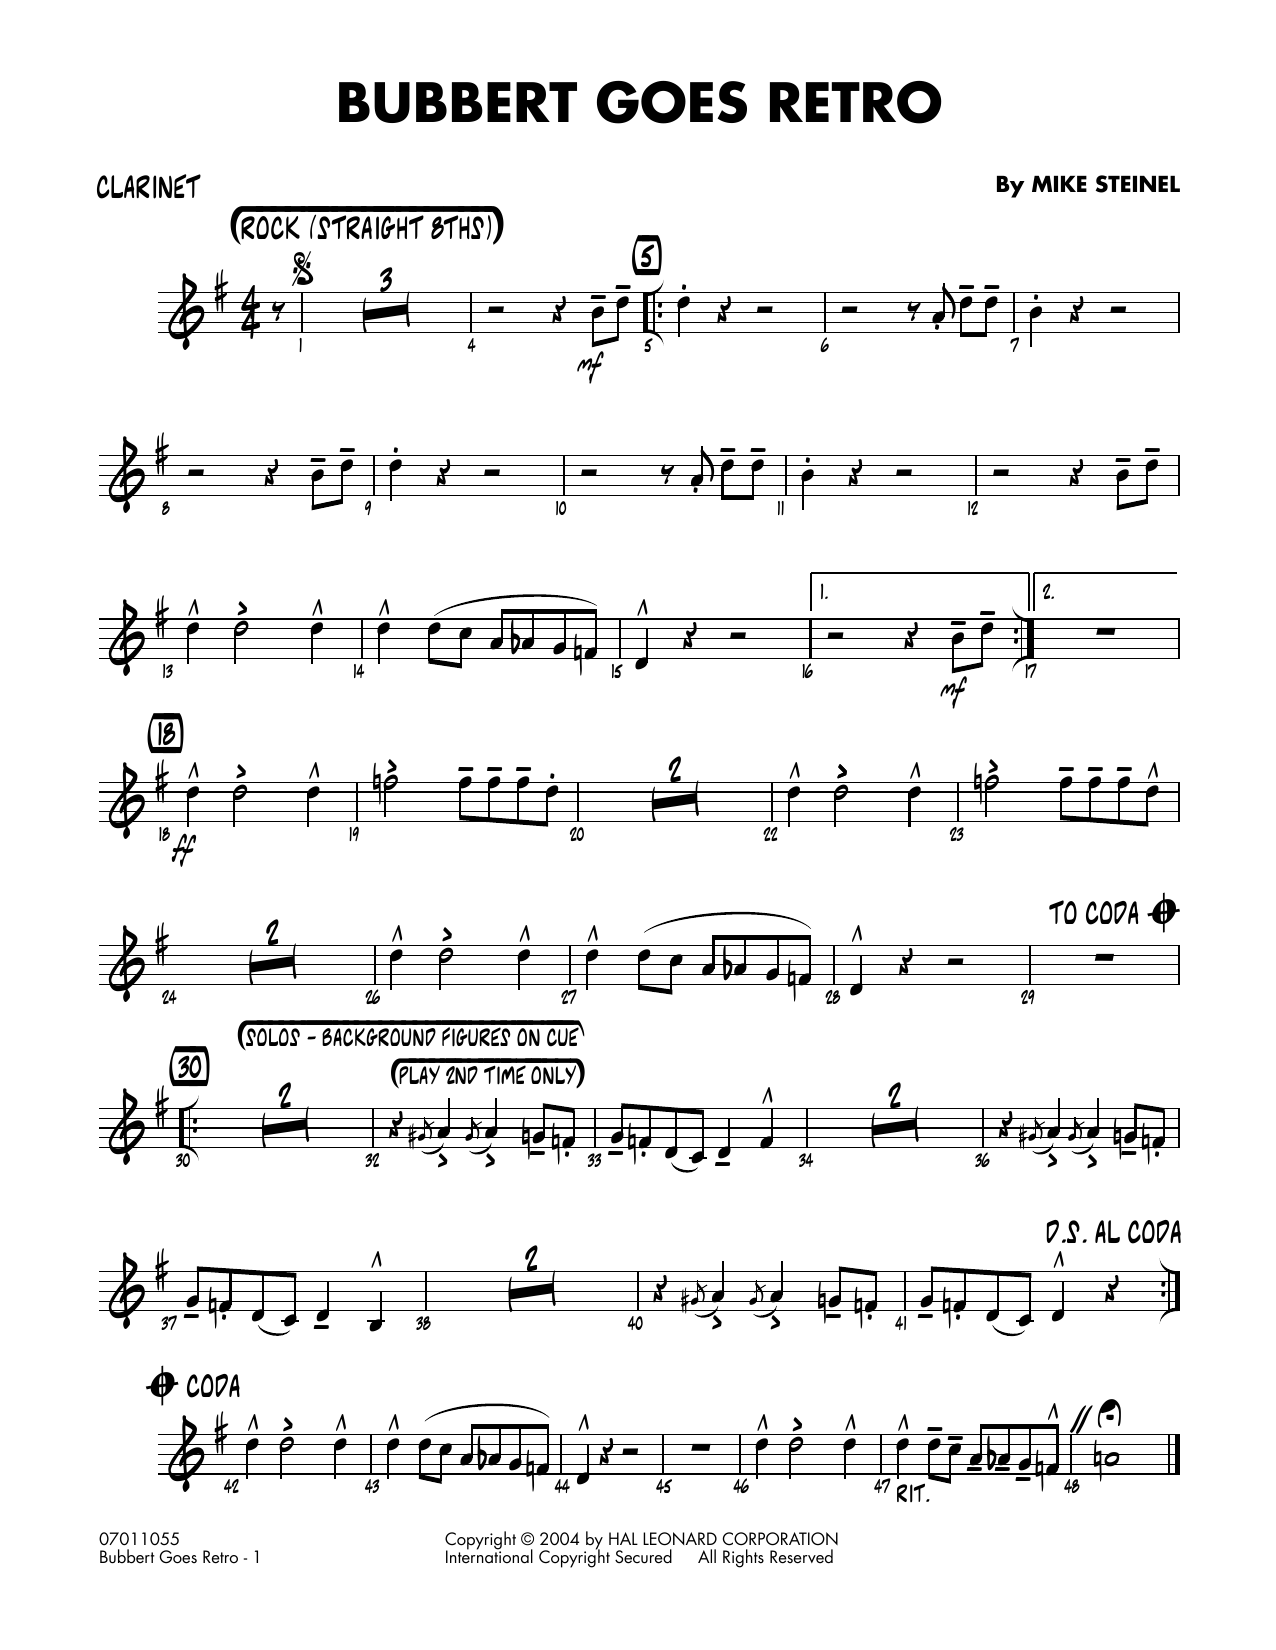 Mike Steinel Bubbert Goes Retro - Clarinet sheet music notes and chords. Download Printable PDF.